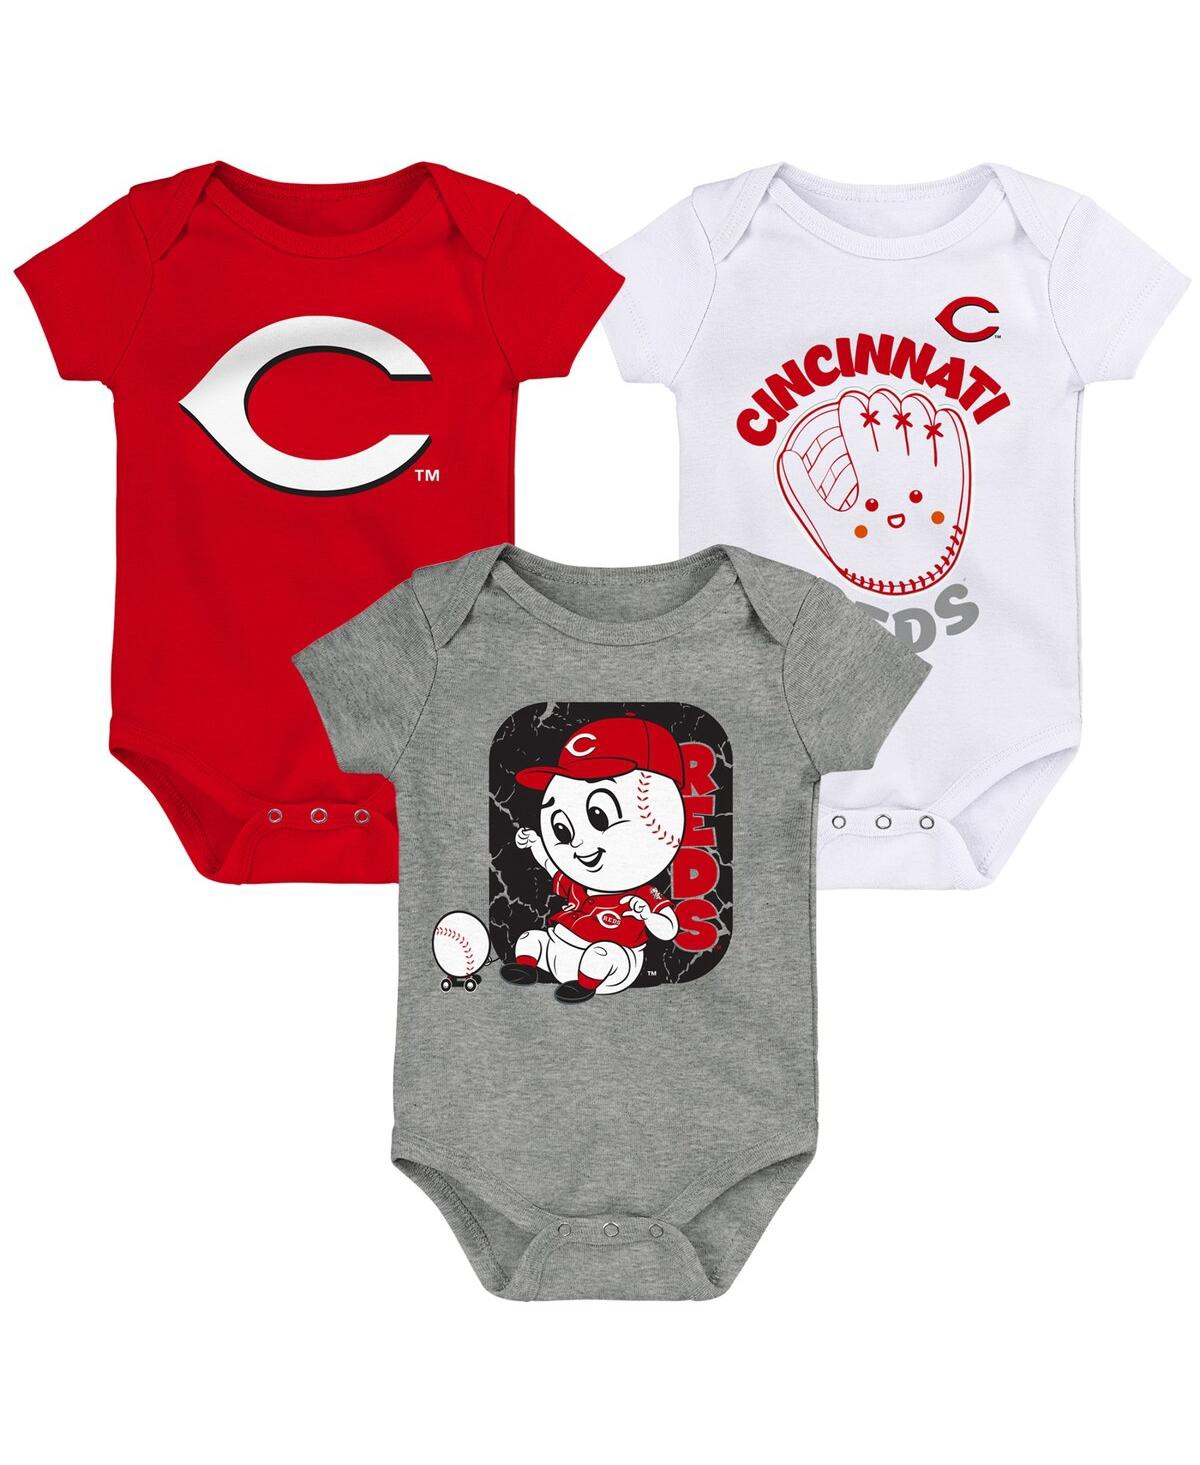 Outerstuff Babies' Newborn And Infant Boys And Girls Red, White, Gray Cincinnati Reds Change Up 3-pack Bodysuit Set In Red,white,heathered Gray